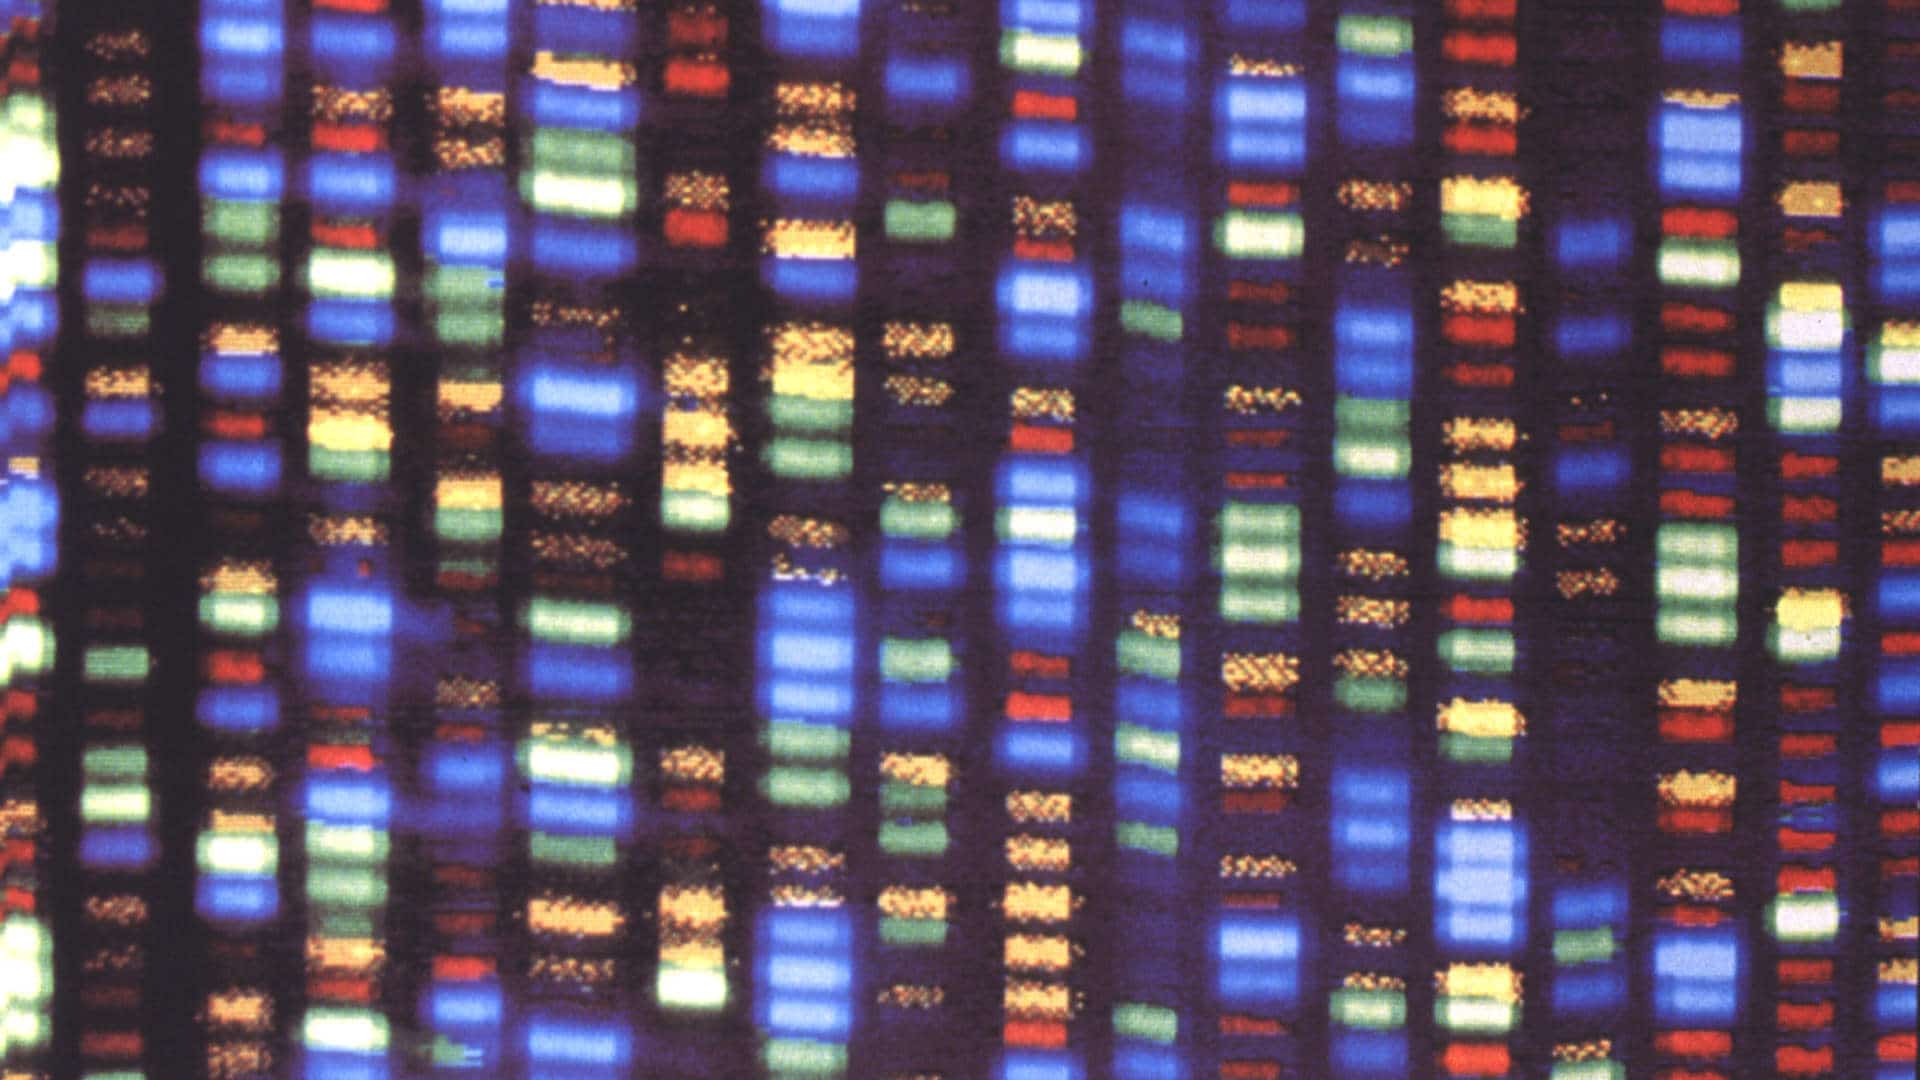 A computerized view of DNA bands, from the book "Gene Discovery in the Human Genome."